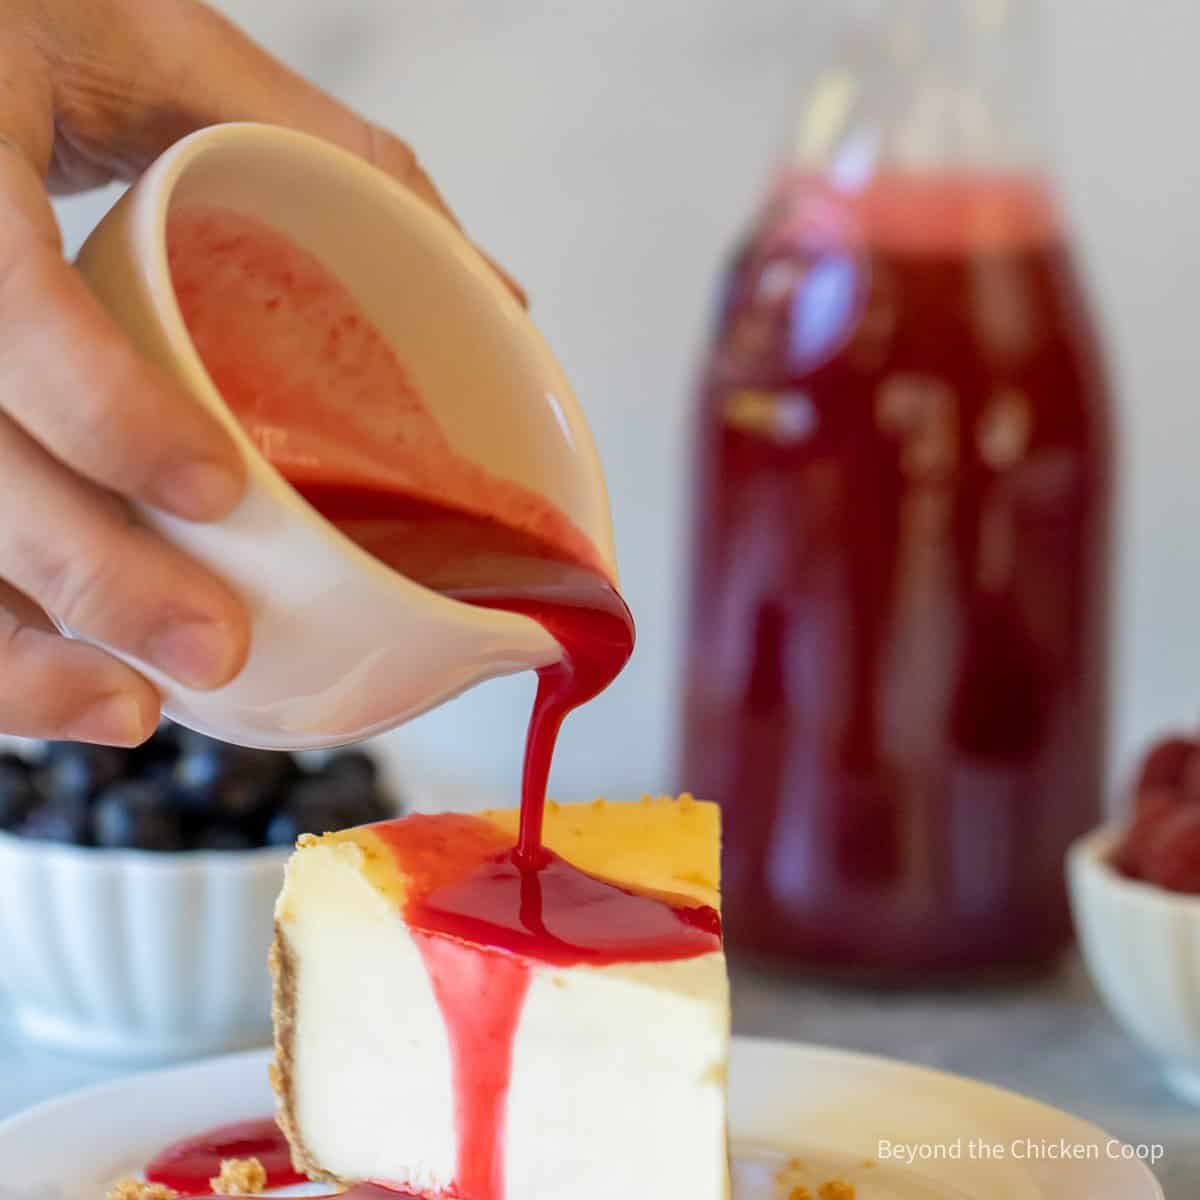 Pouring a red syrup onto a slice of cheesecake.